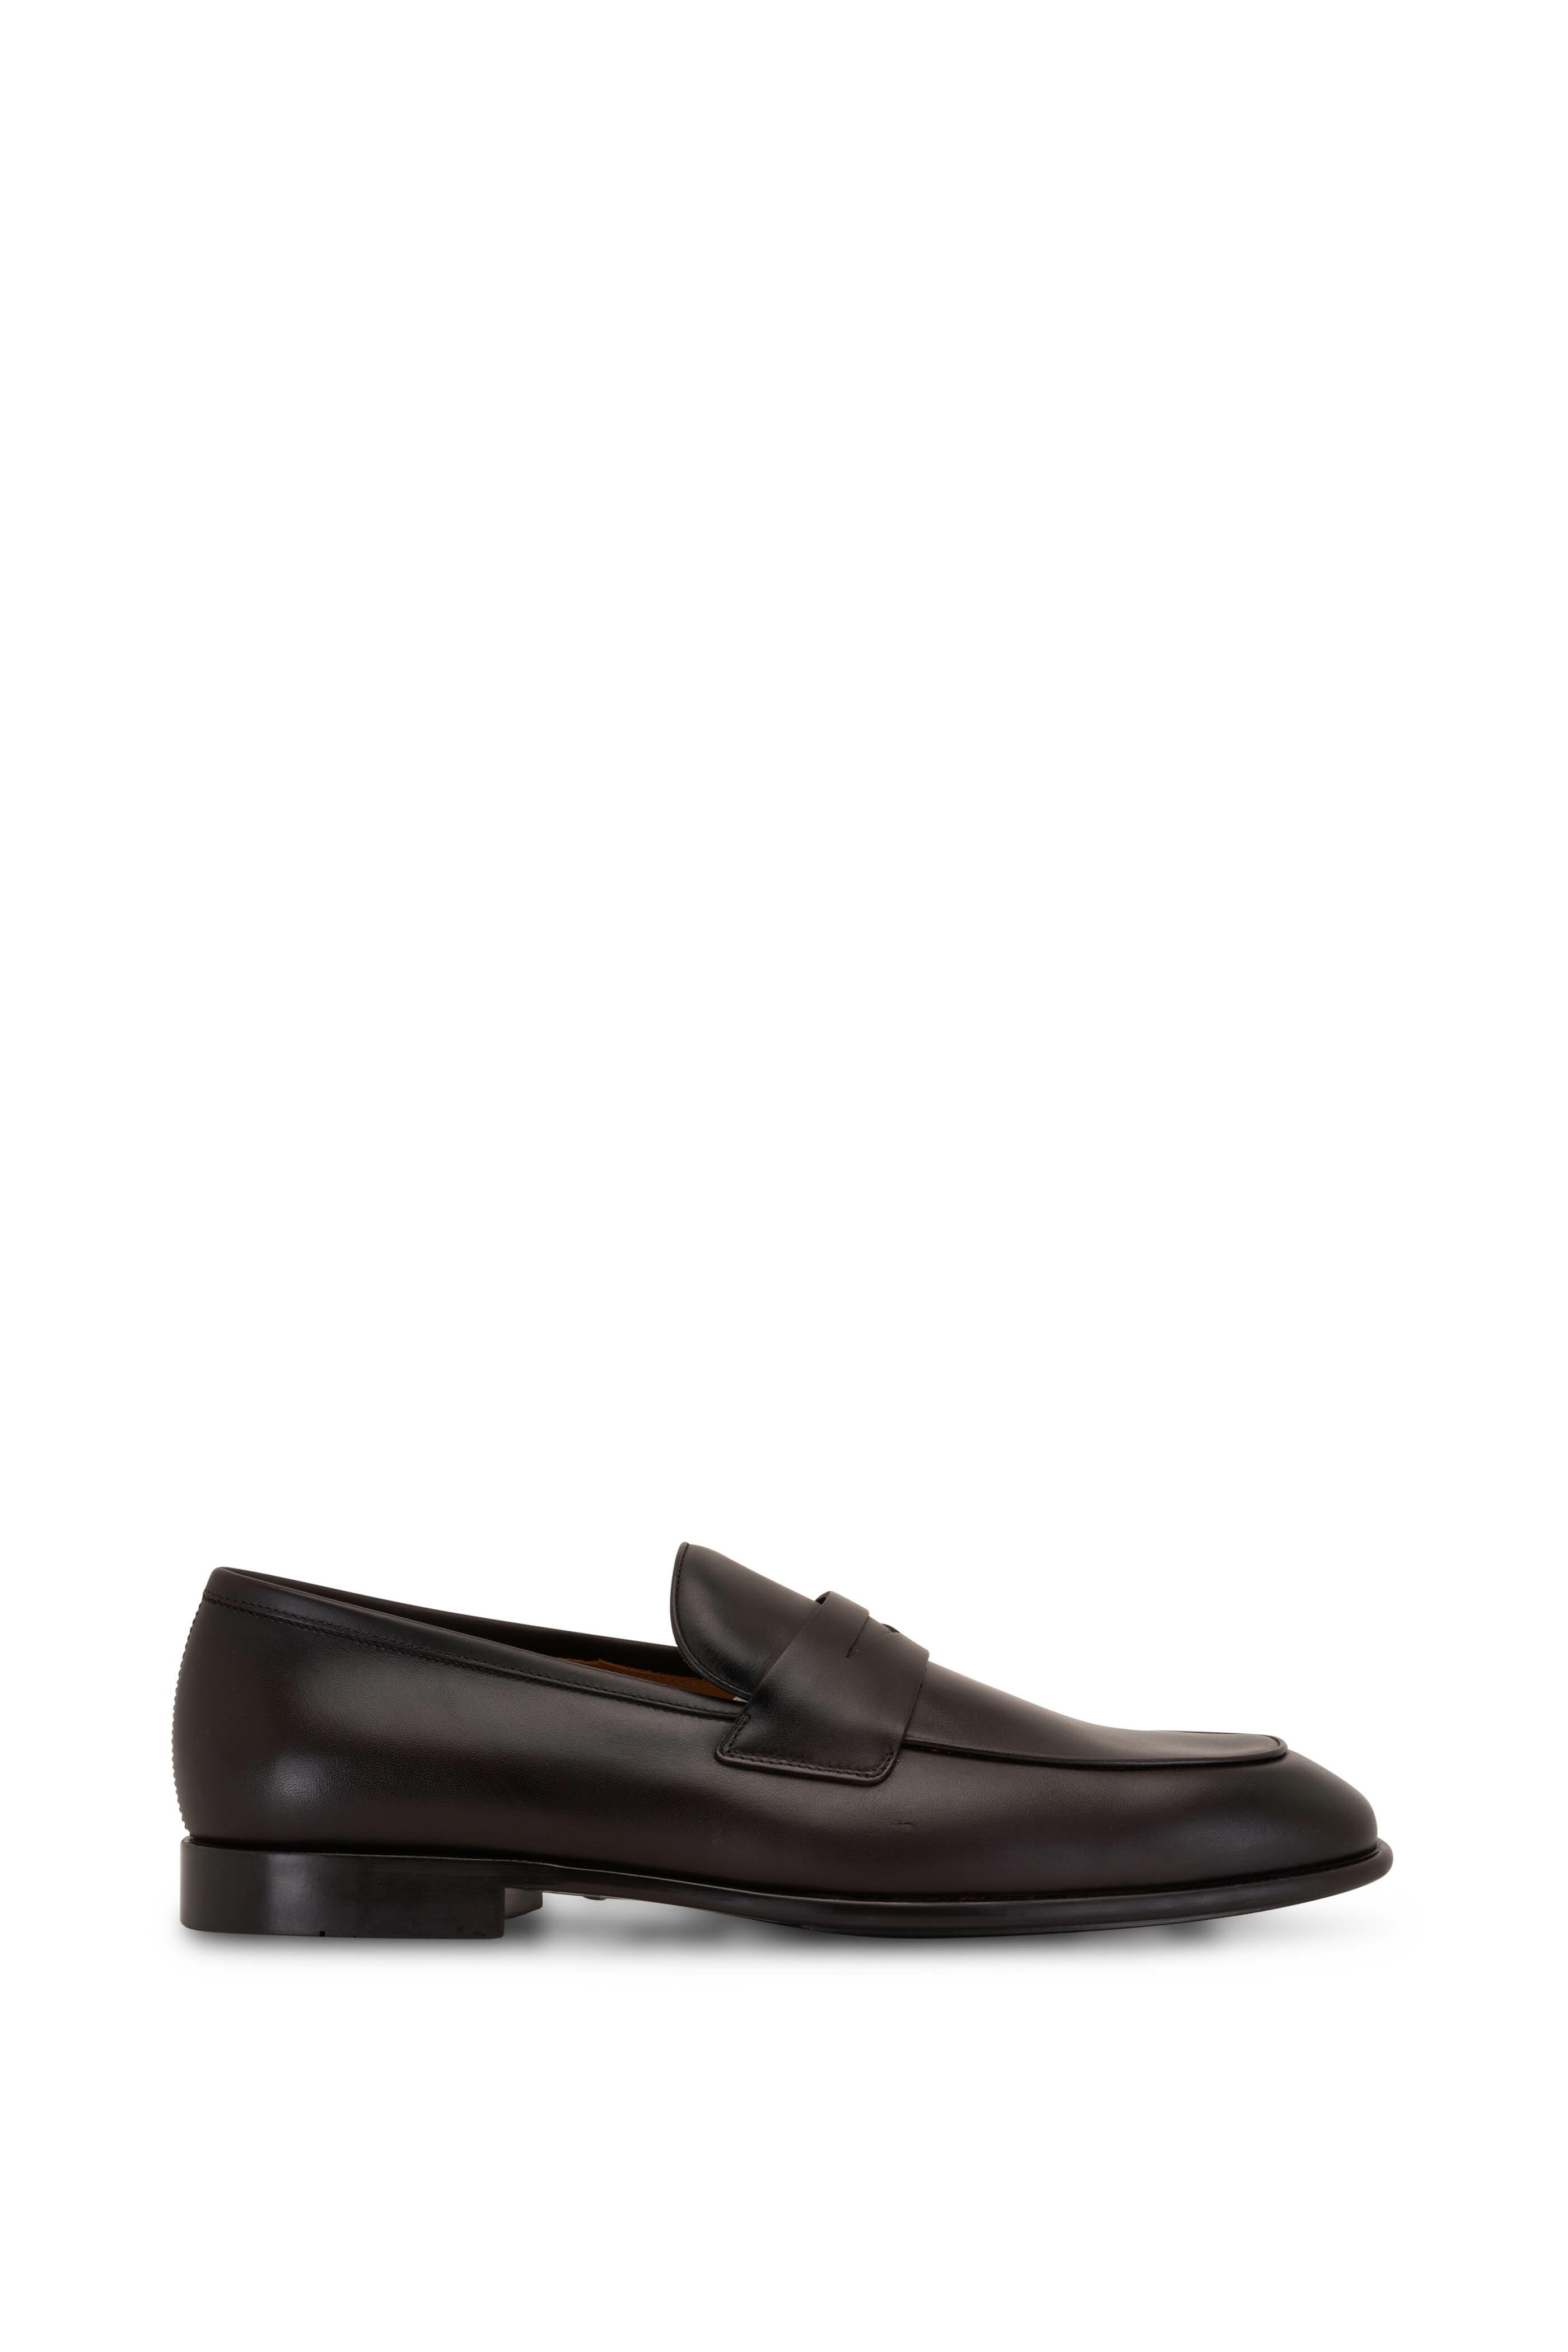 Ferragamo - Funes Hickory Brown Leather Loafer | Mitchell Stores